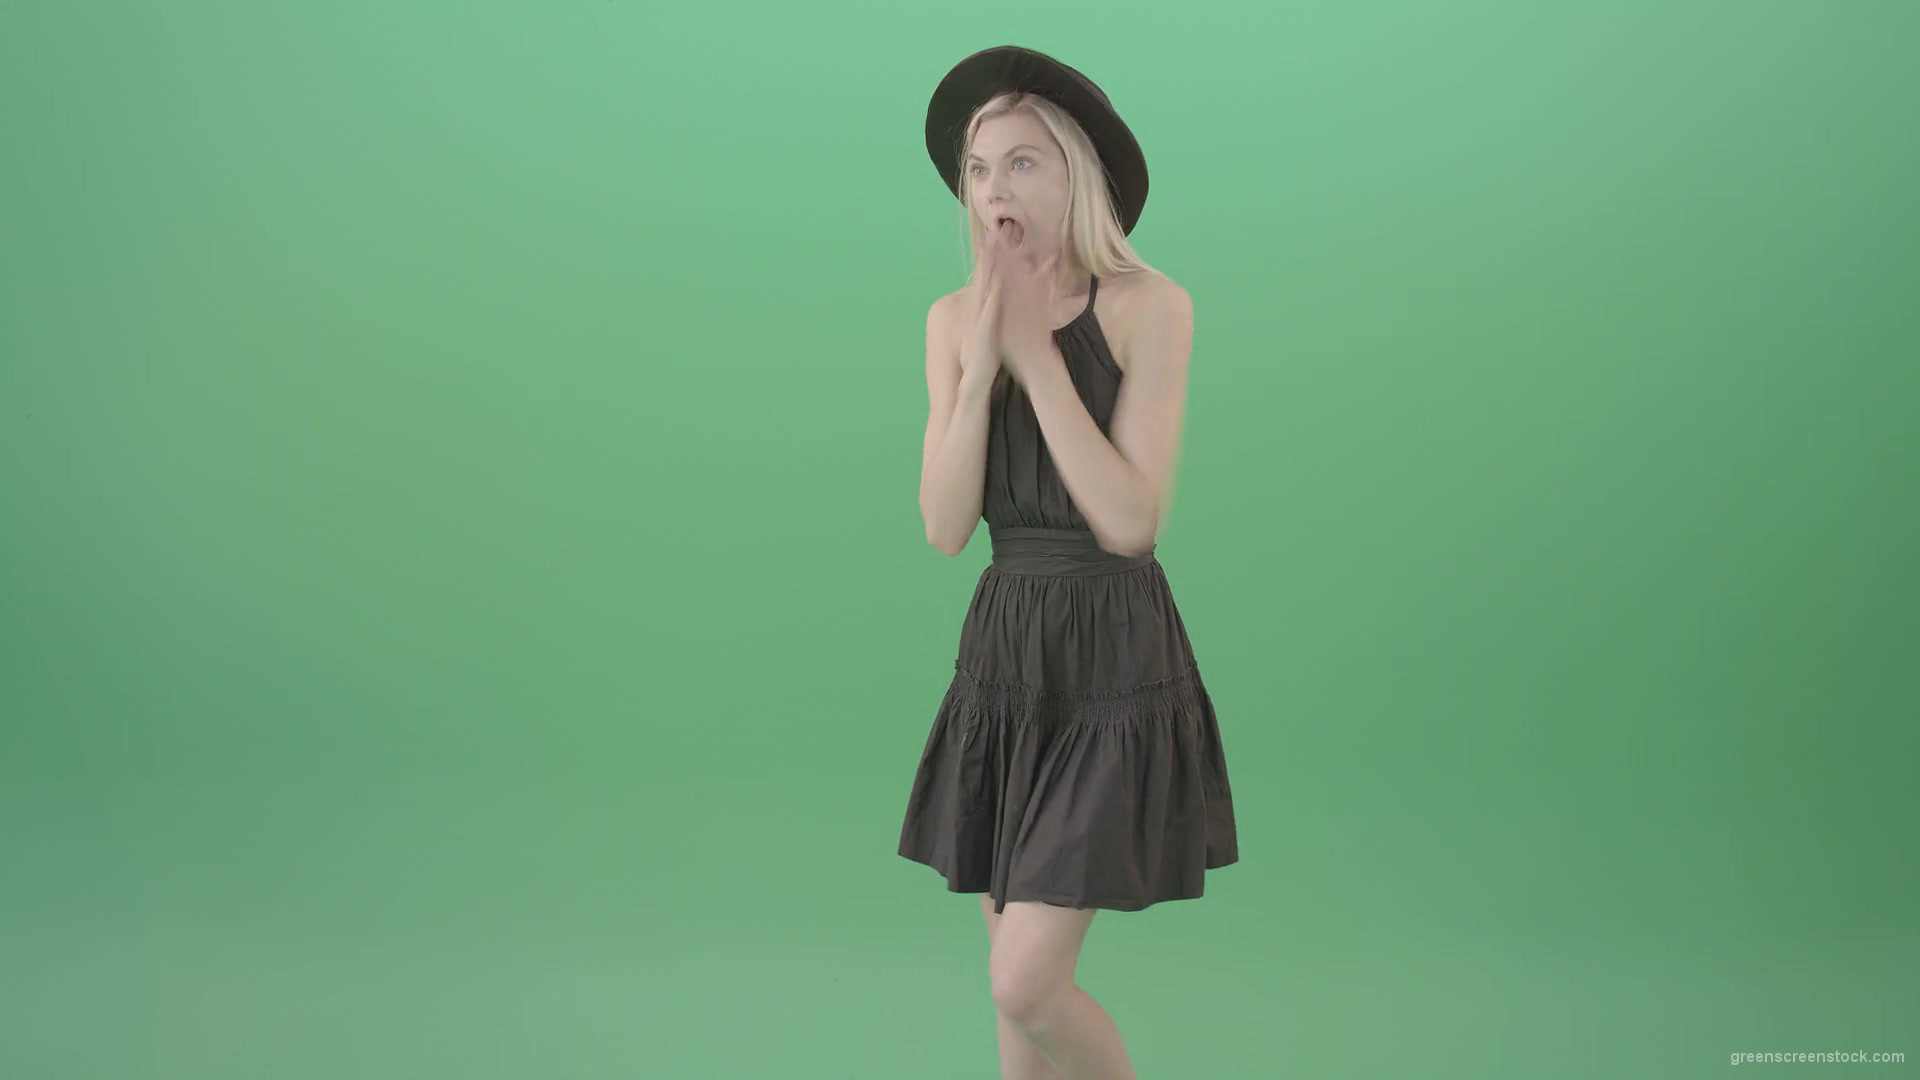 Happy-wow-effect-blonde-girl-slides-products-on-internet-on-touch-screen-4K-Green-Screen-Video-Footage-1920_006 Green Screen Stock